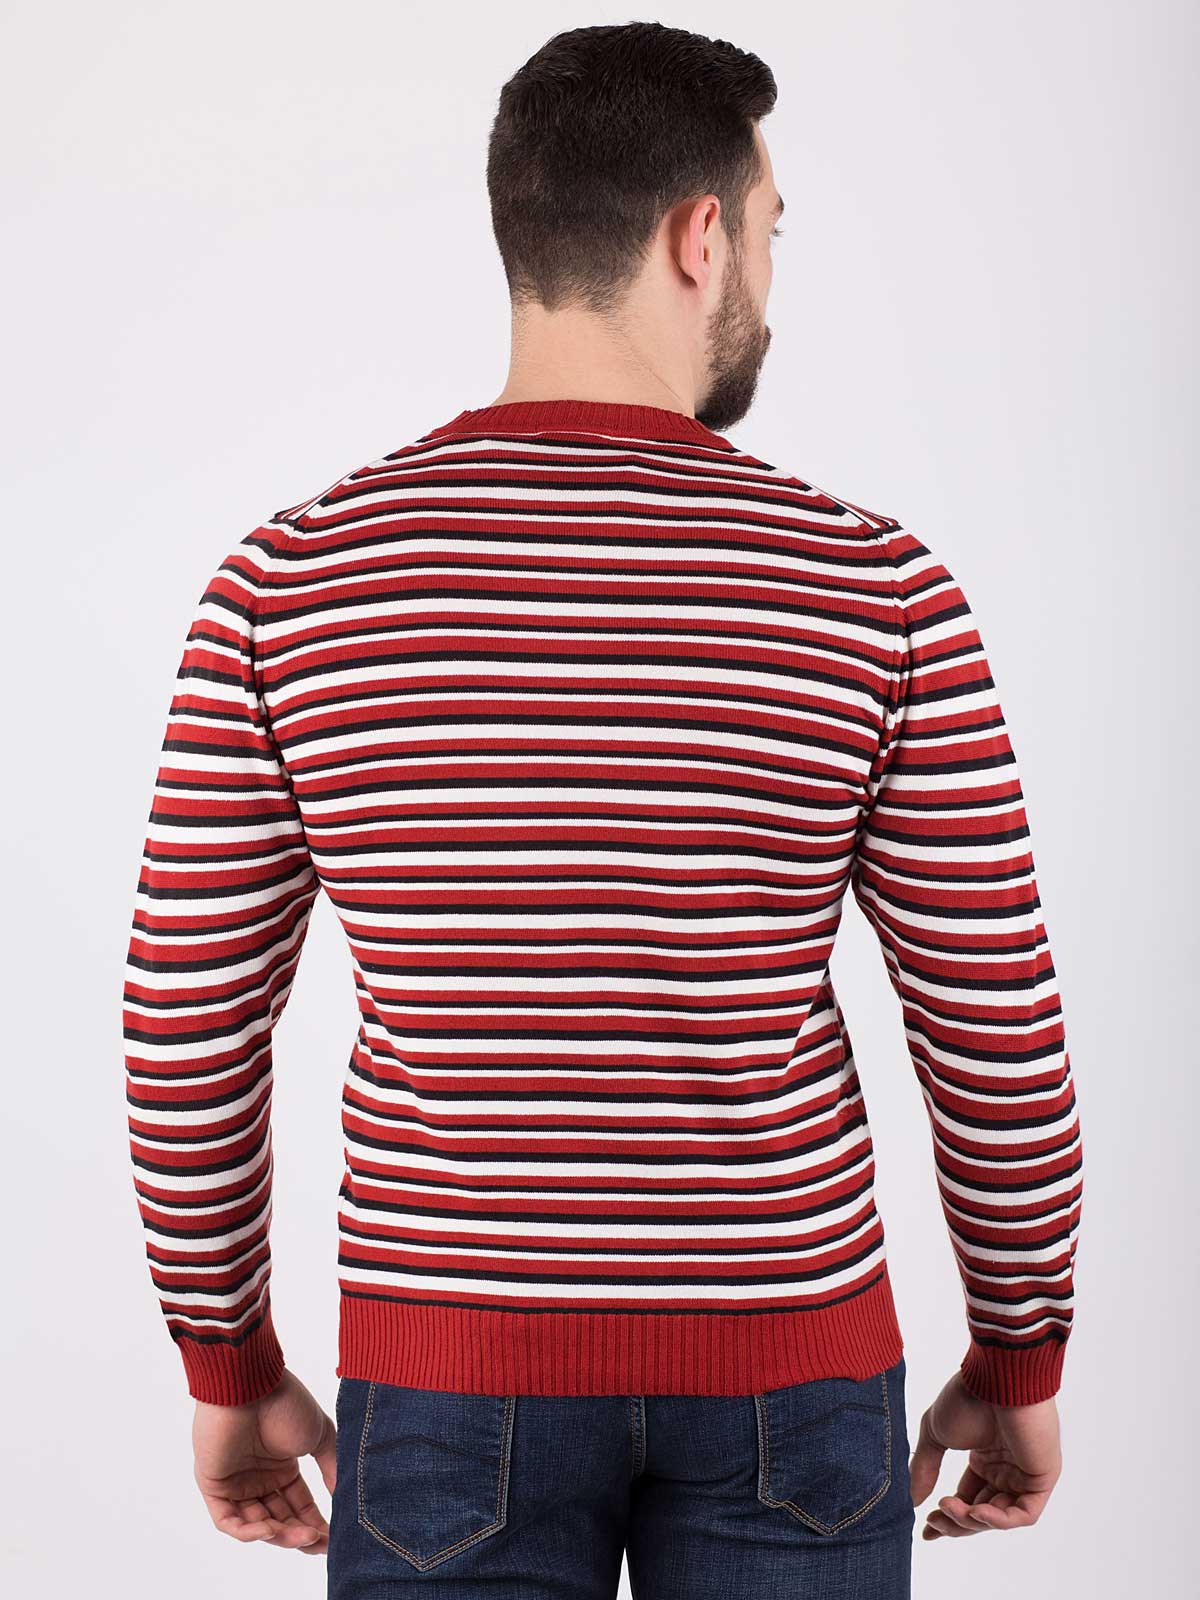 Striped sweater in three colors - 35076 € 6.75 img2